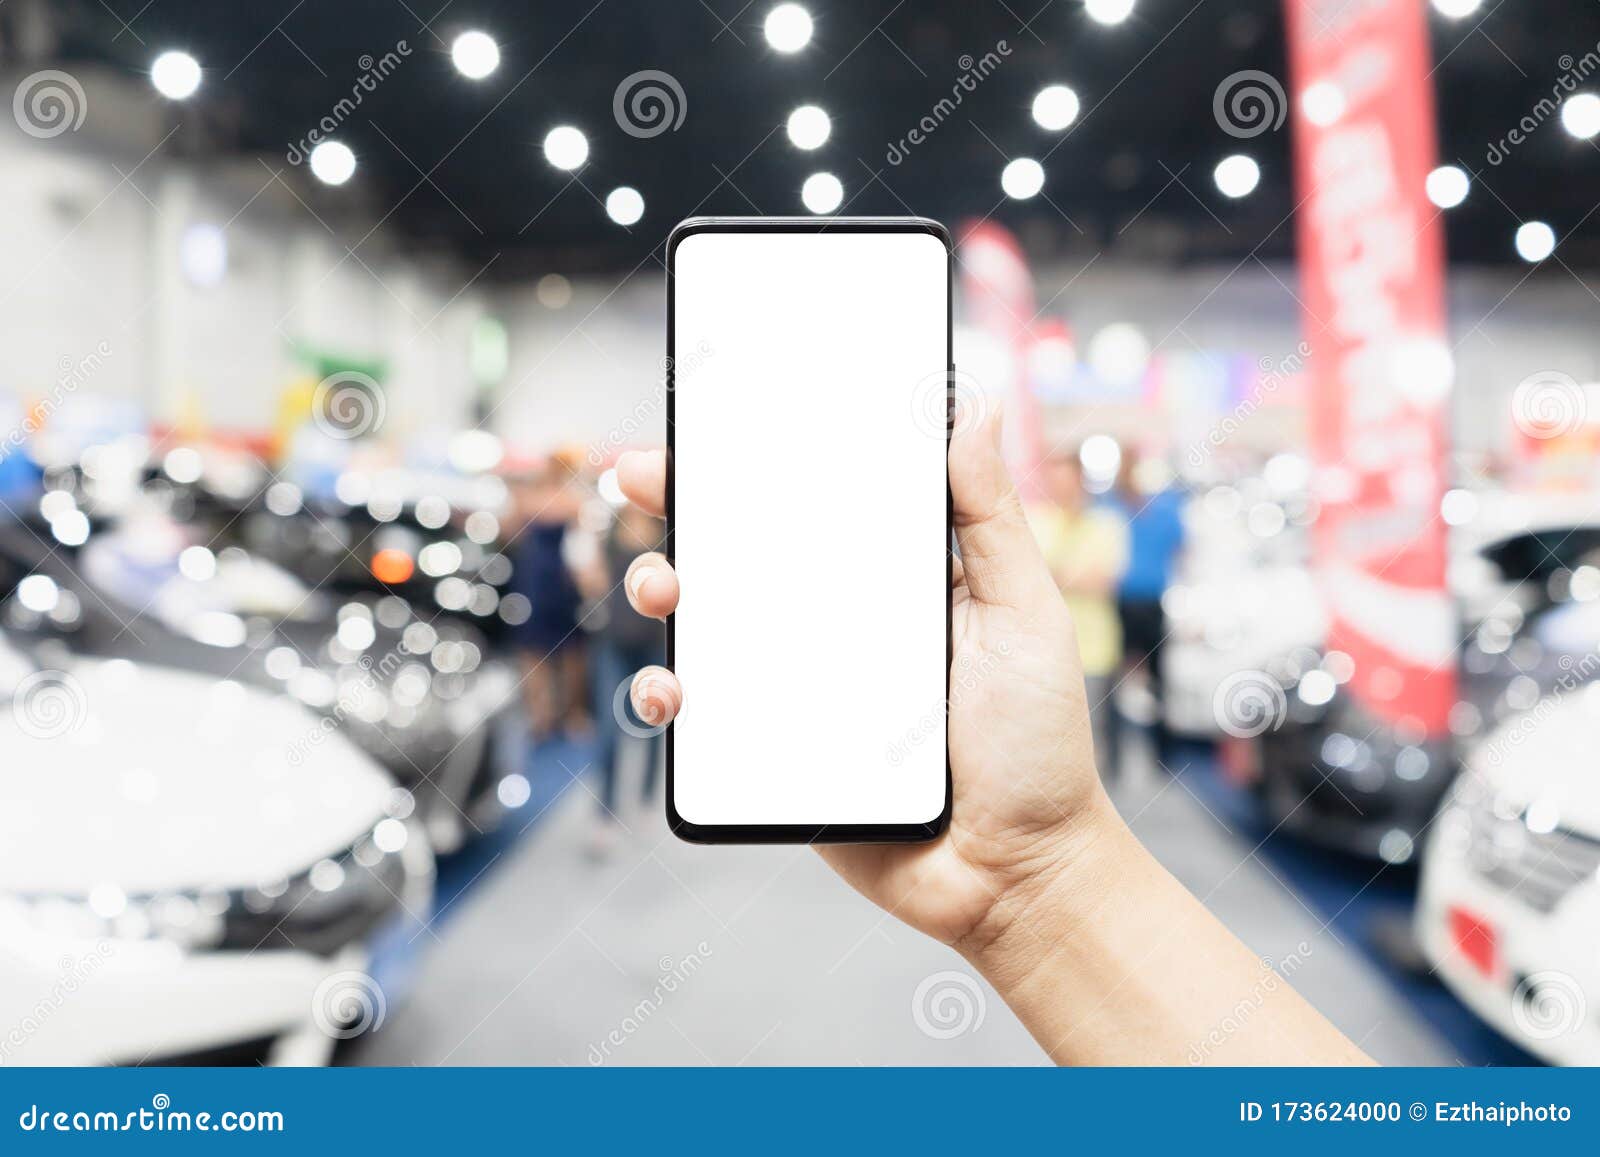 Mock Up Mobile Phone Hand Holding Mobile Phone with Abstract Blurred Cars Exhibition Show  